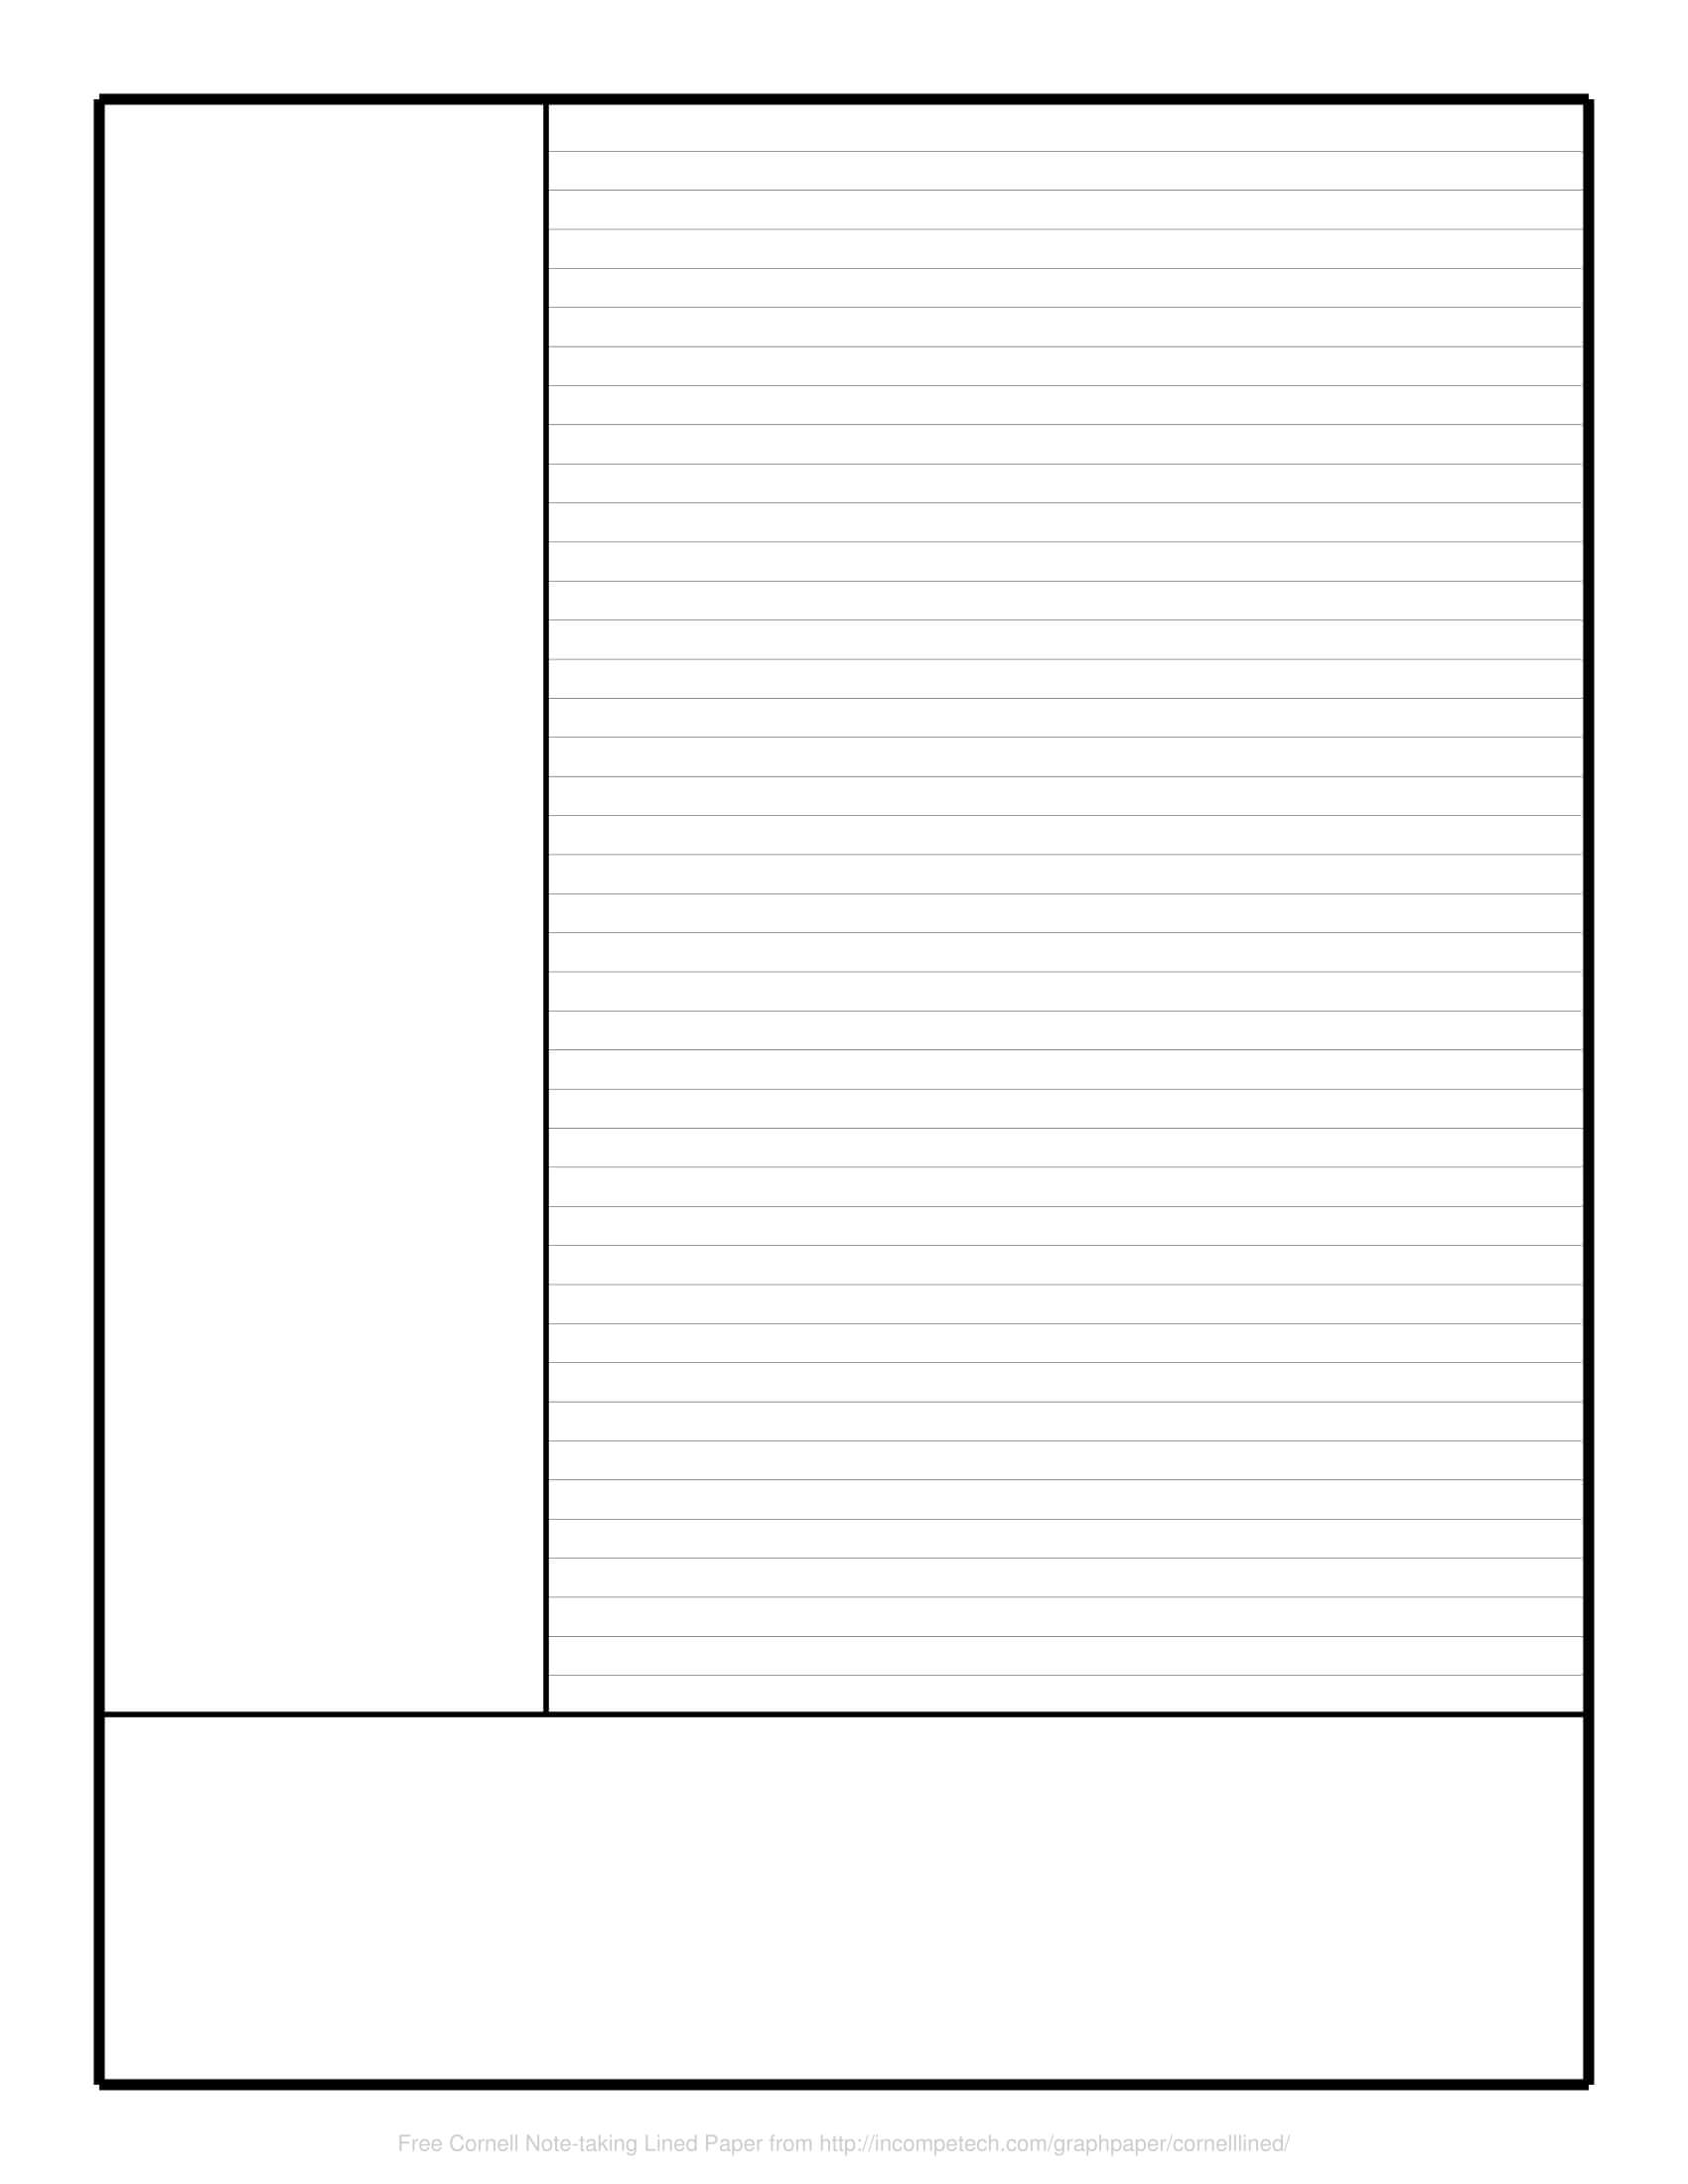 008-cornell-notes-template-download-1920x2636-within-within-cornell